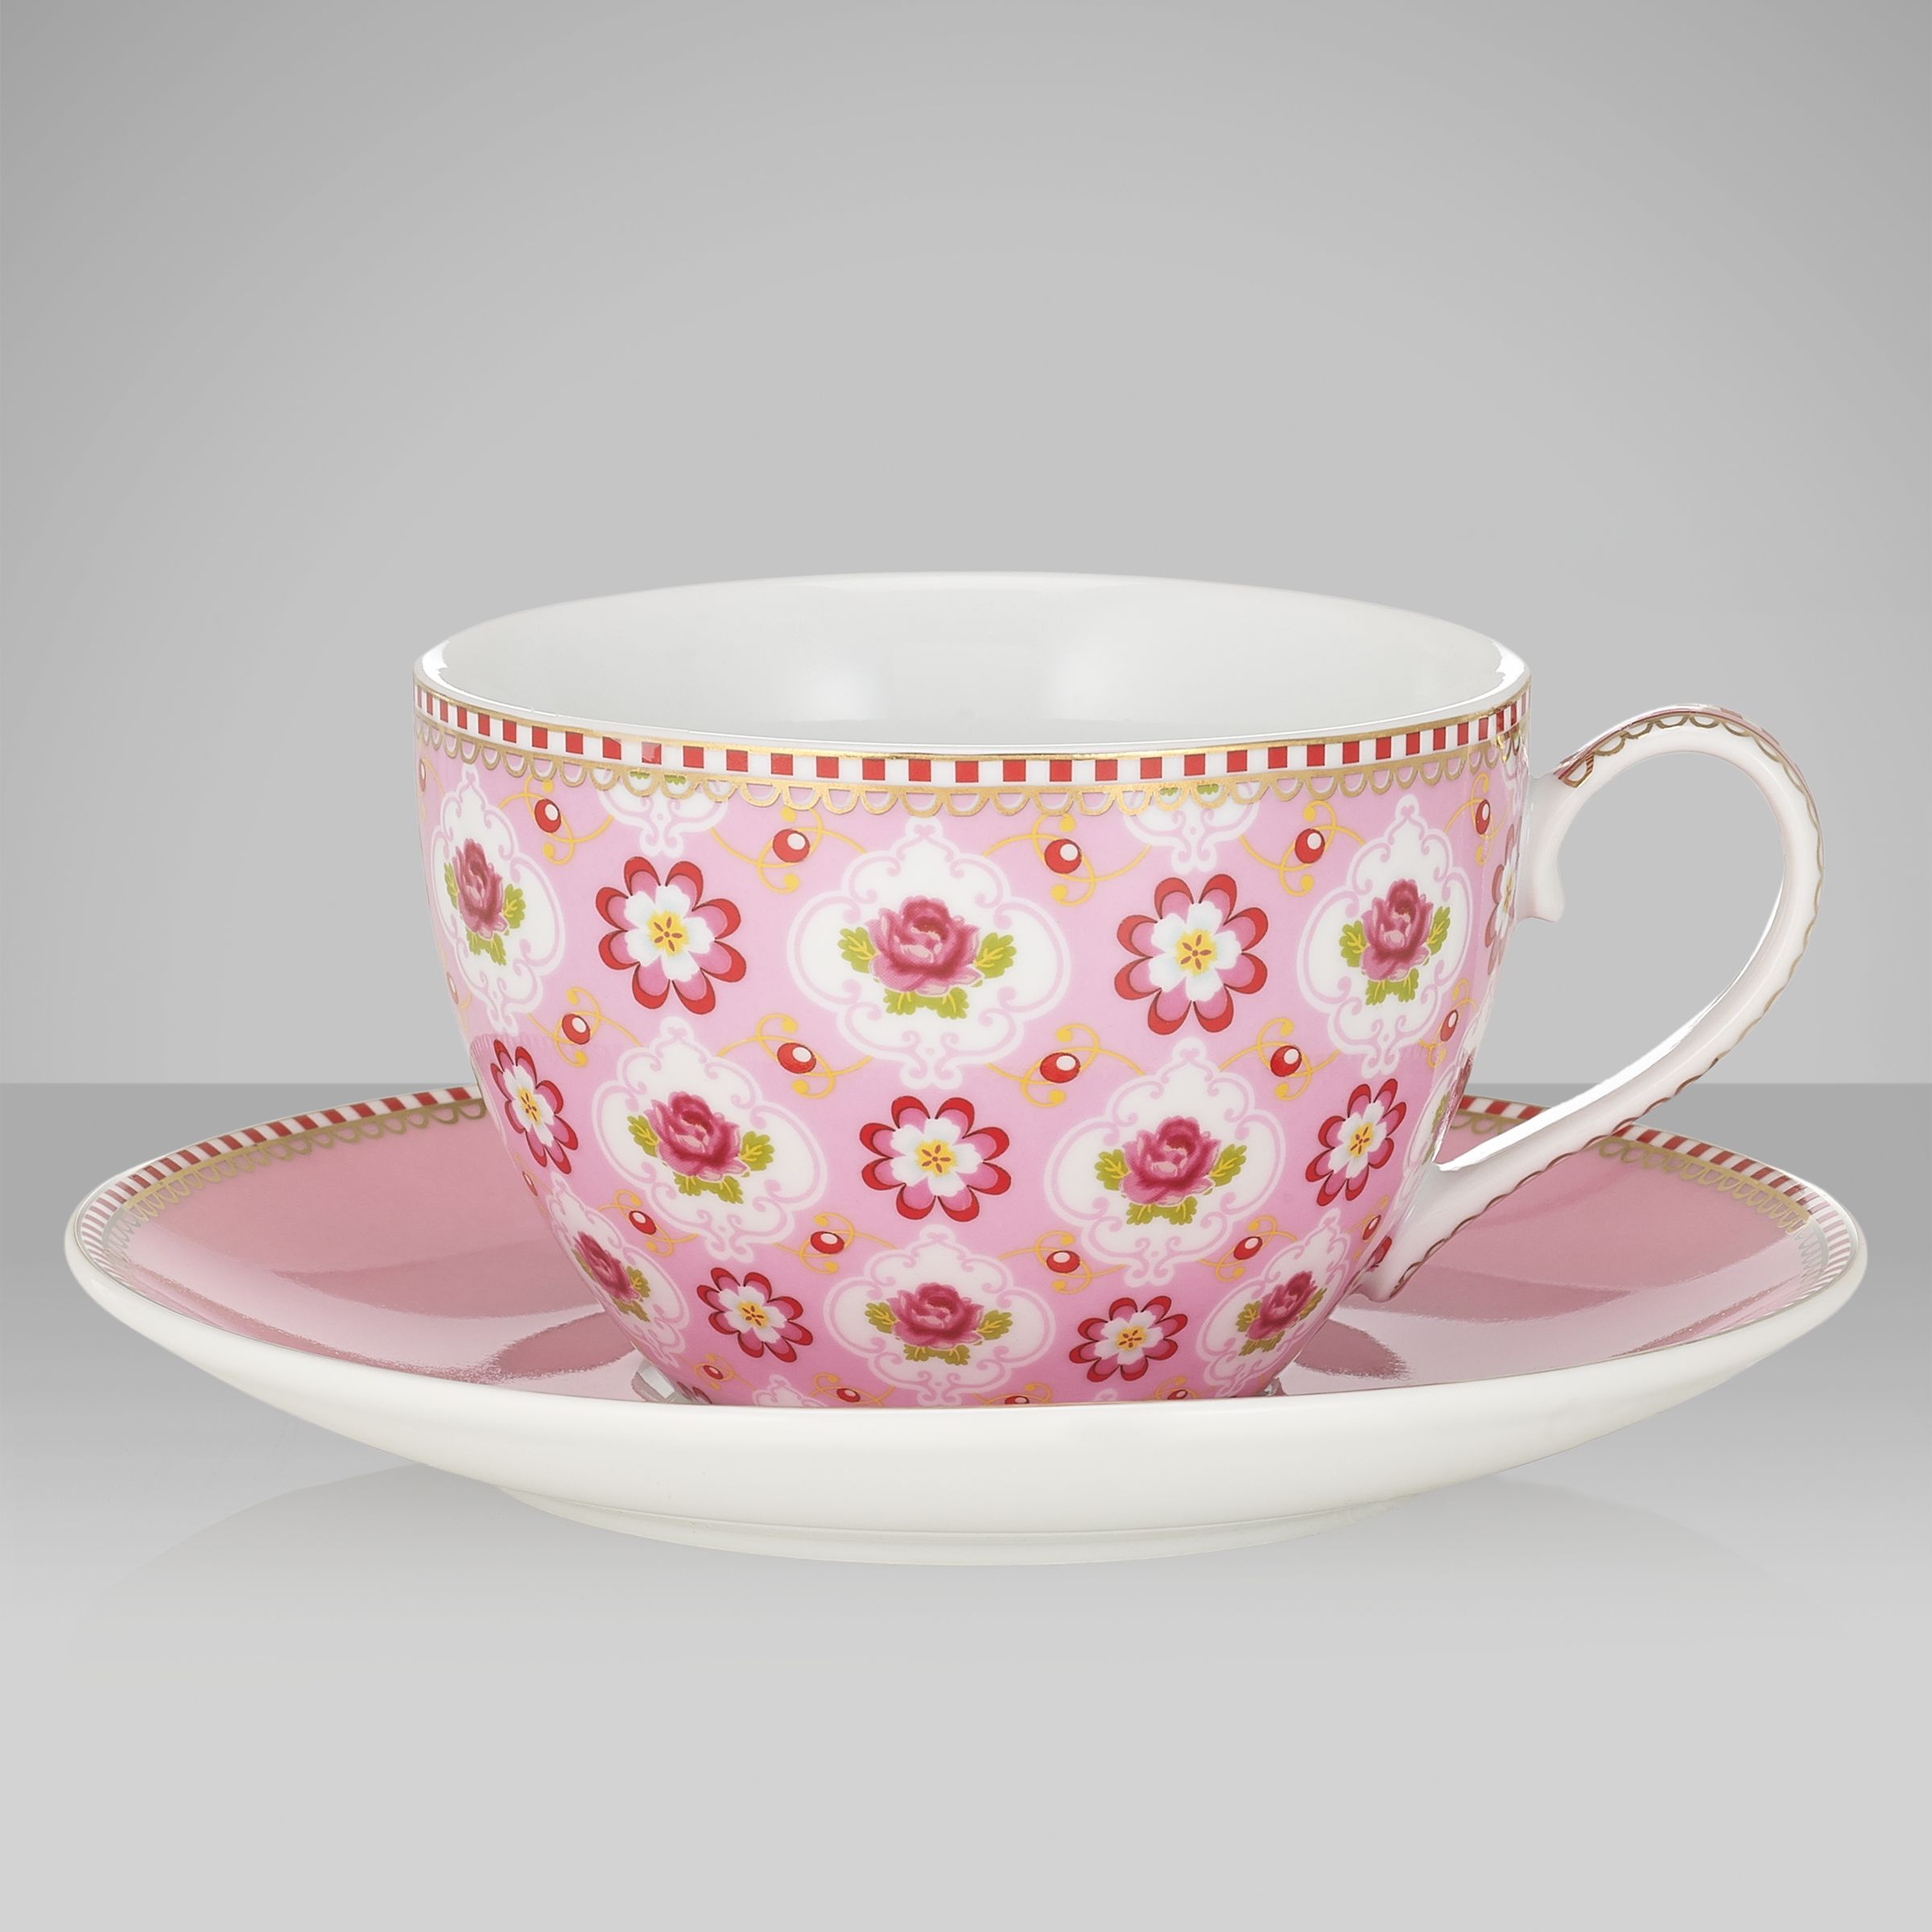 Blossom Cup & Saucer, 0.3L, Pink 435617